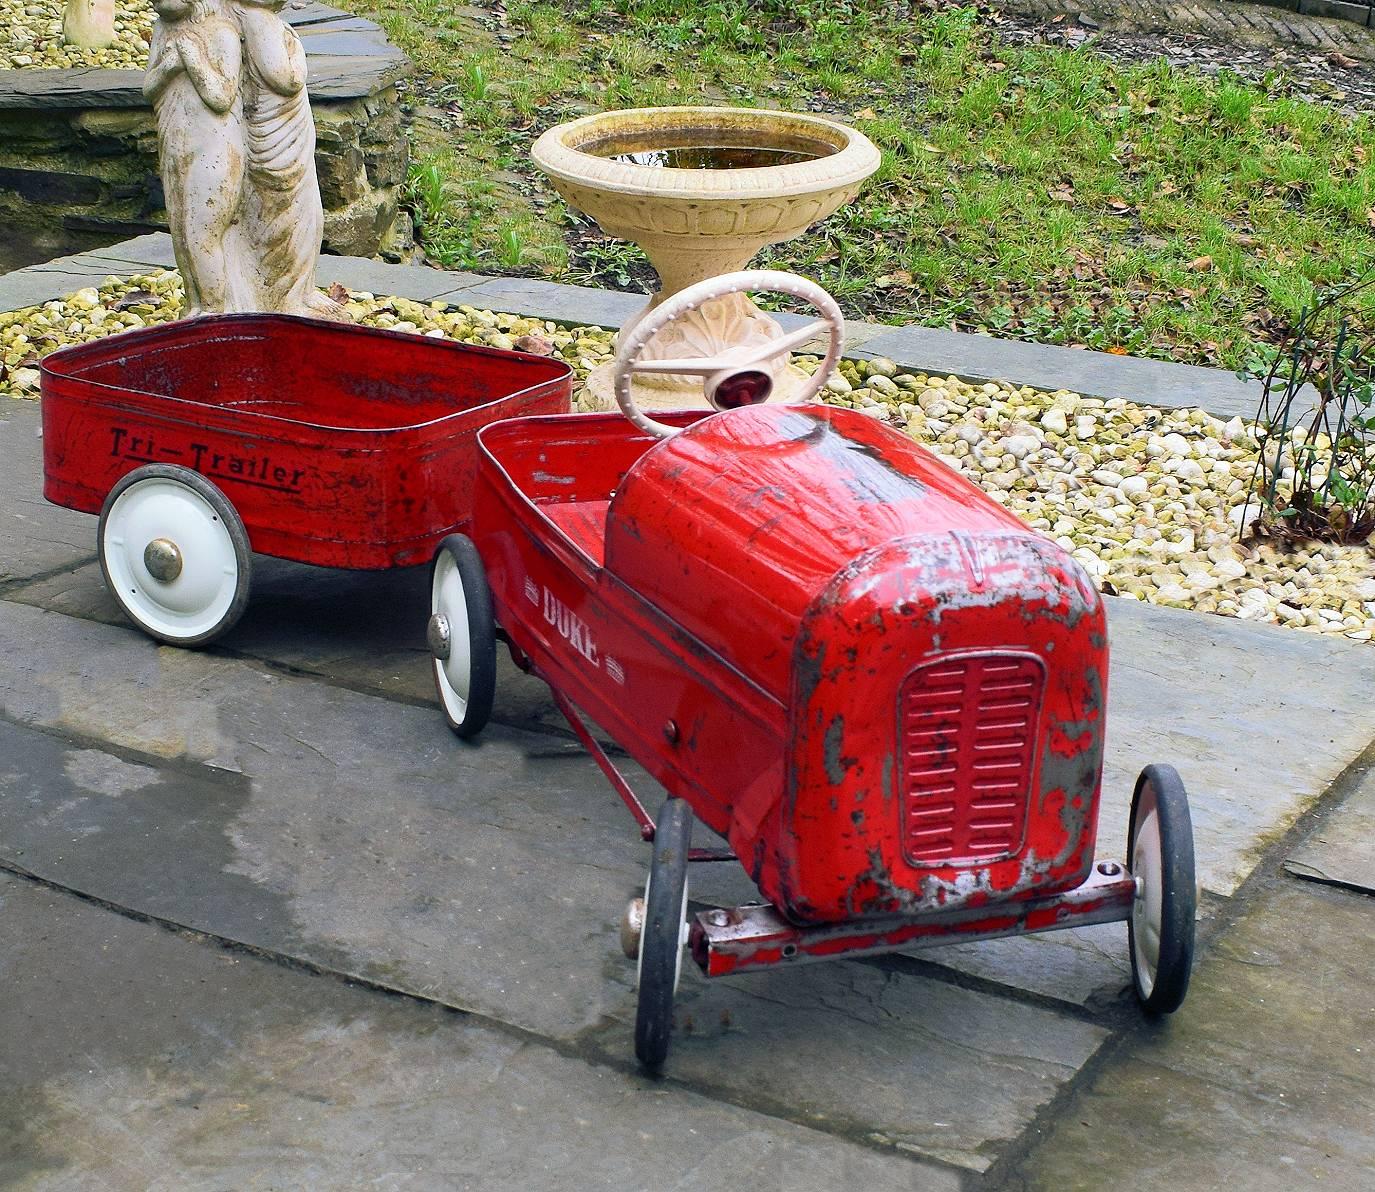 Mid-Century Modern English 'Duke' Childs pedal Car by Triang with Tri Trailer